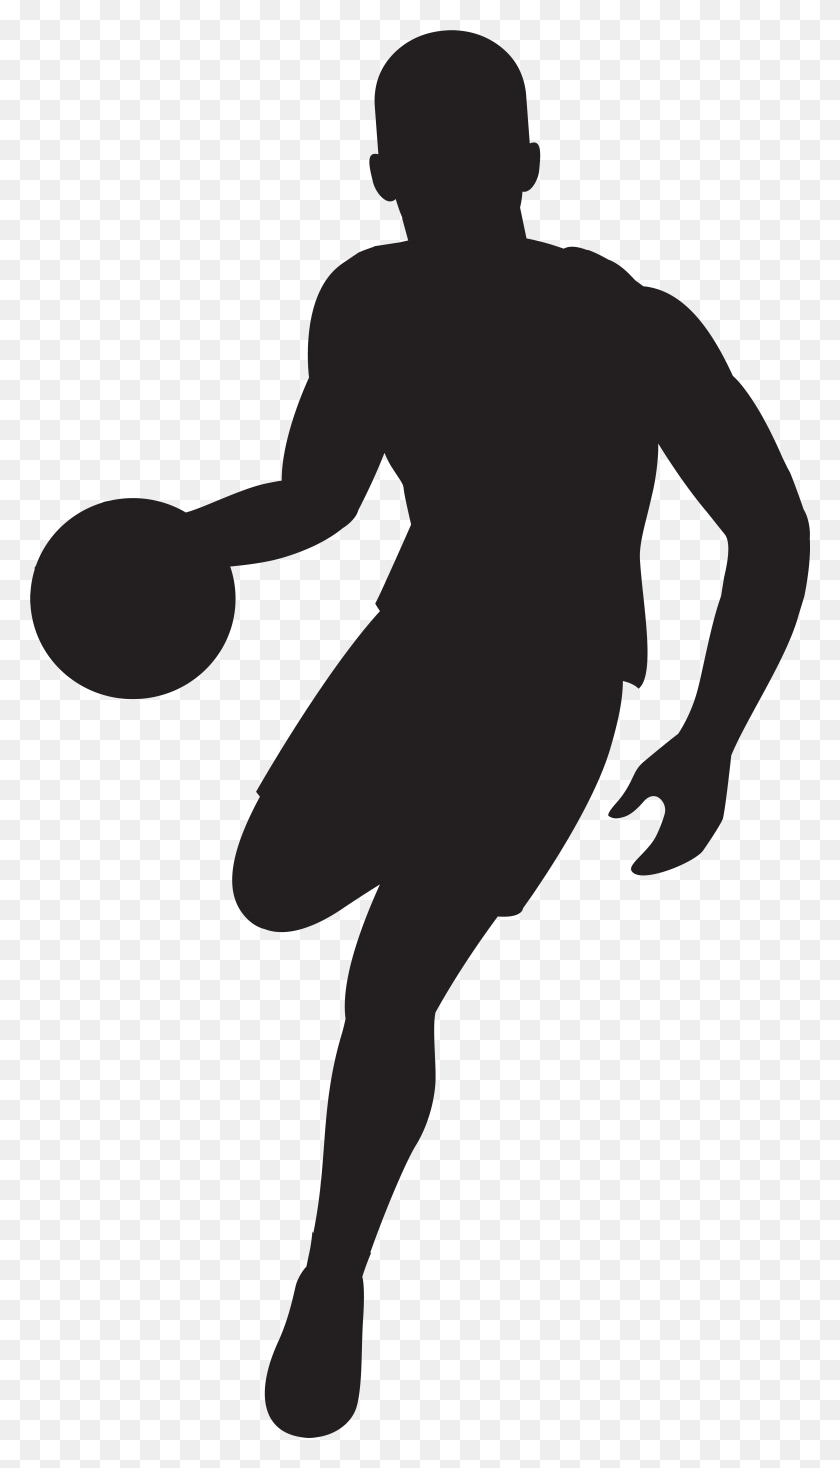 4396x7936 Basketball Player Silhouette Clip Art Gallery - Football Player Clipart Free